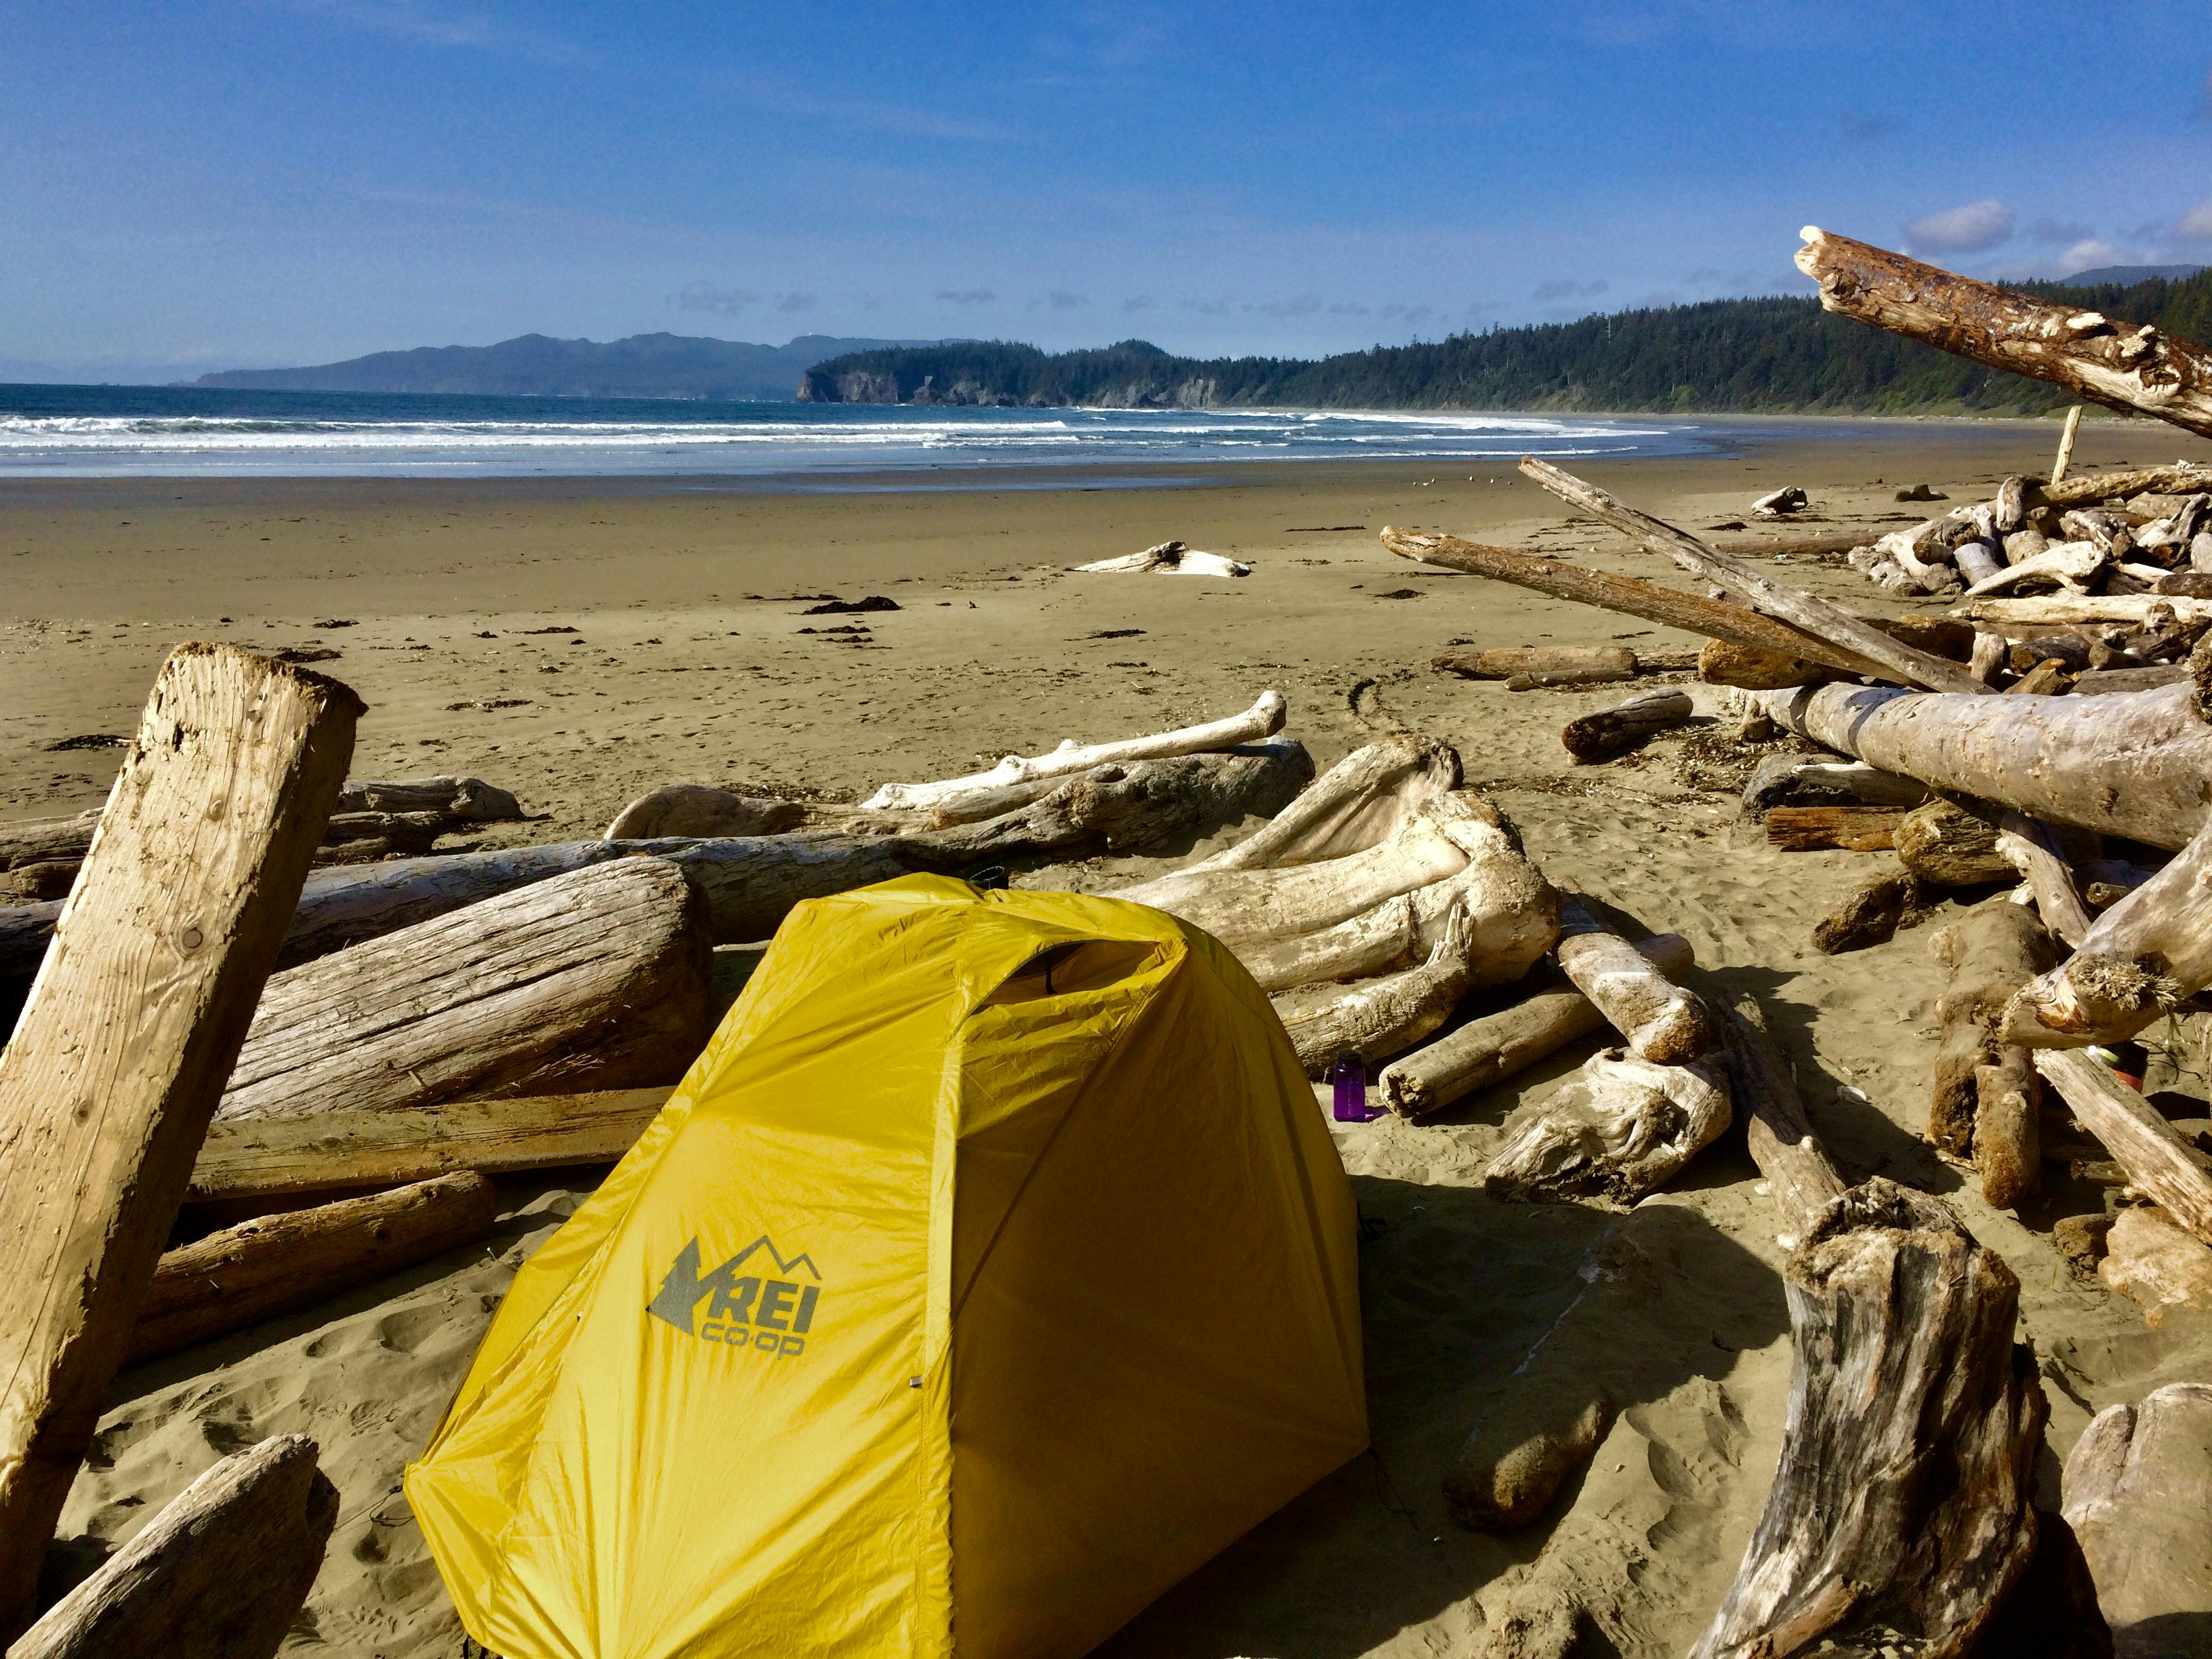 Backpacking on the beach. Image credit: Dan Purdy